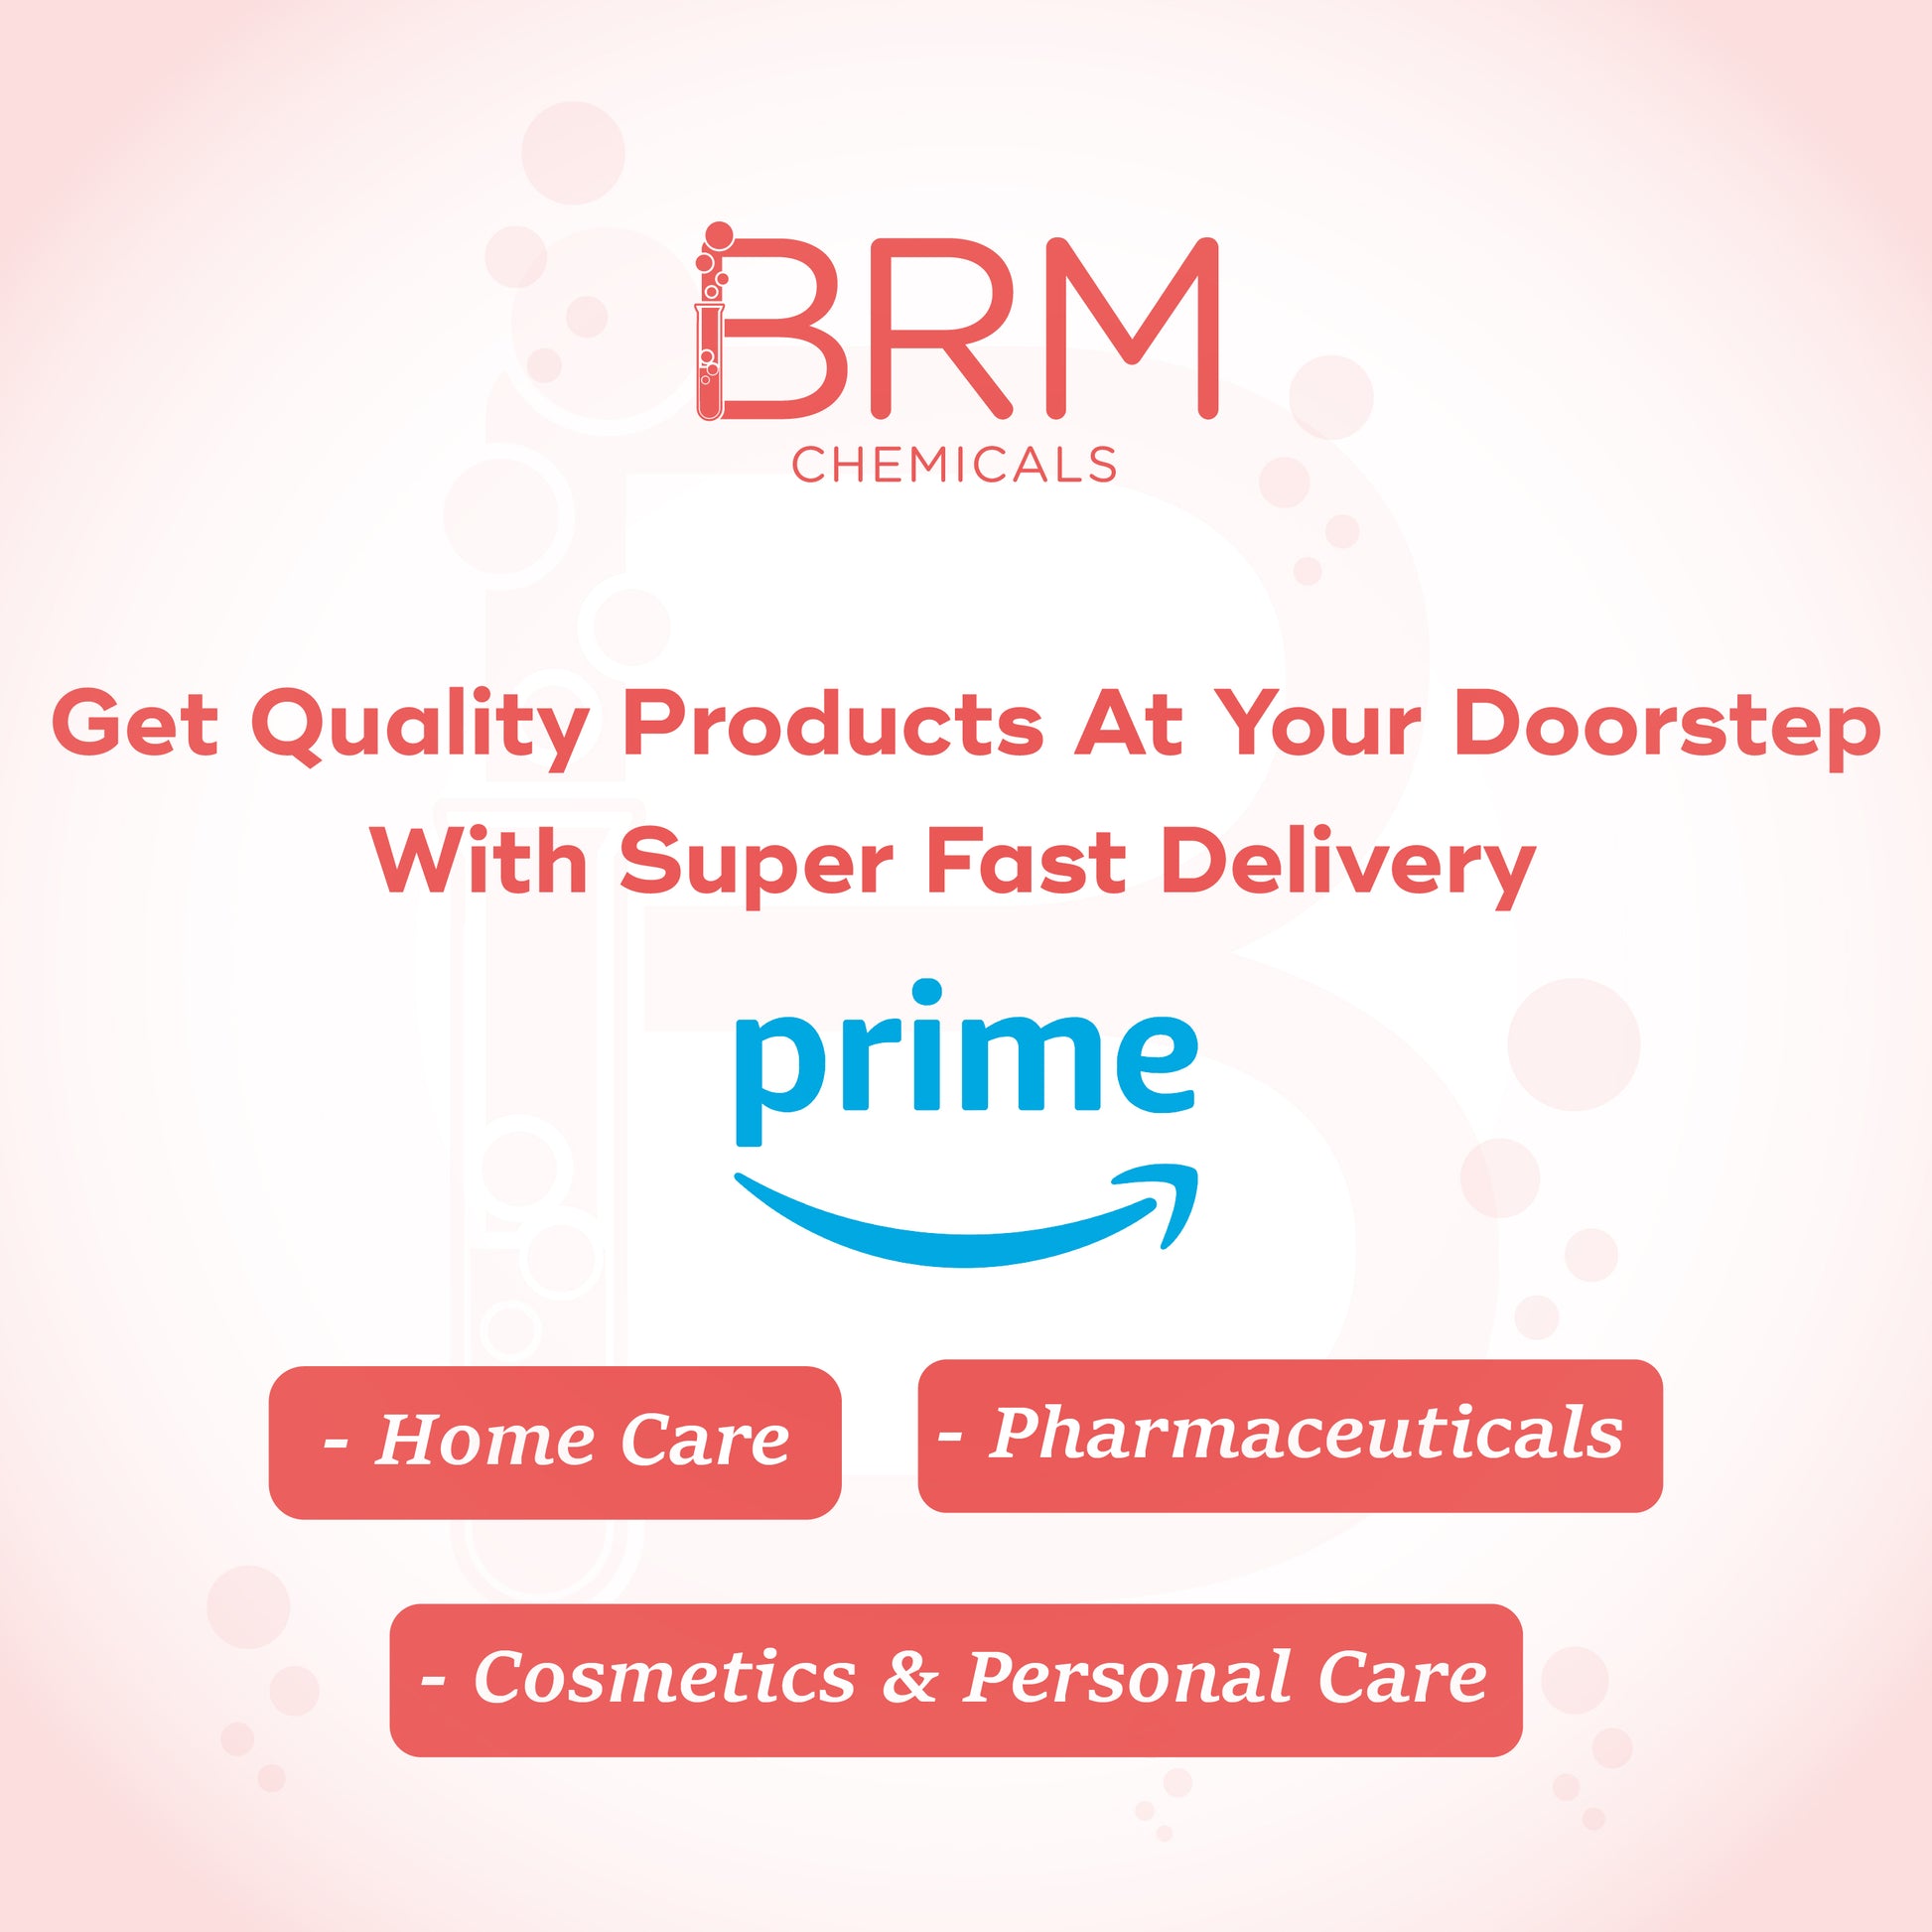 brm chemicals' poster for fast deliver to doorstep